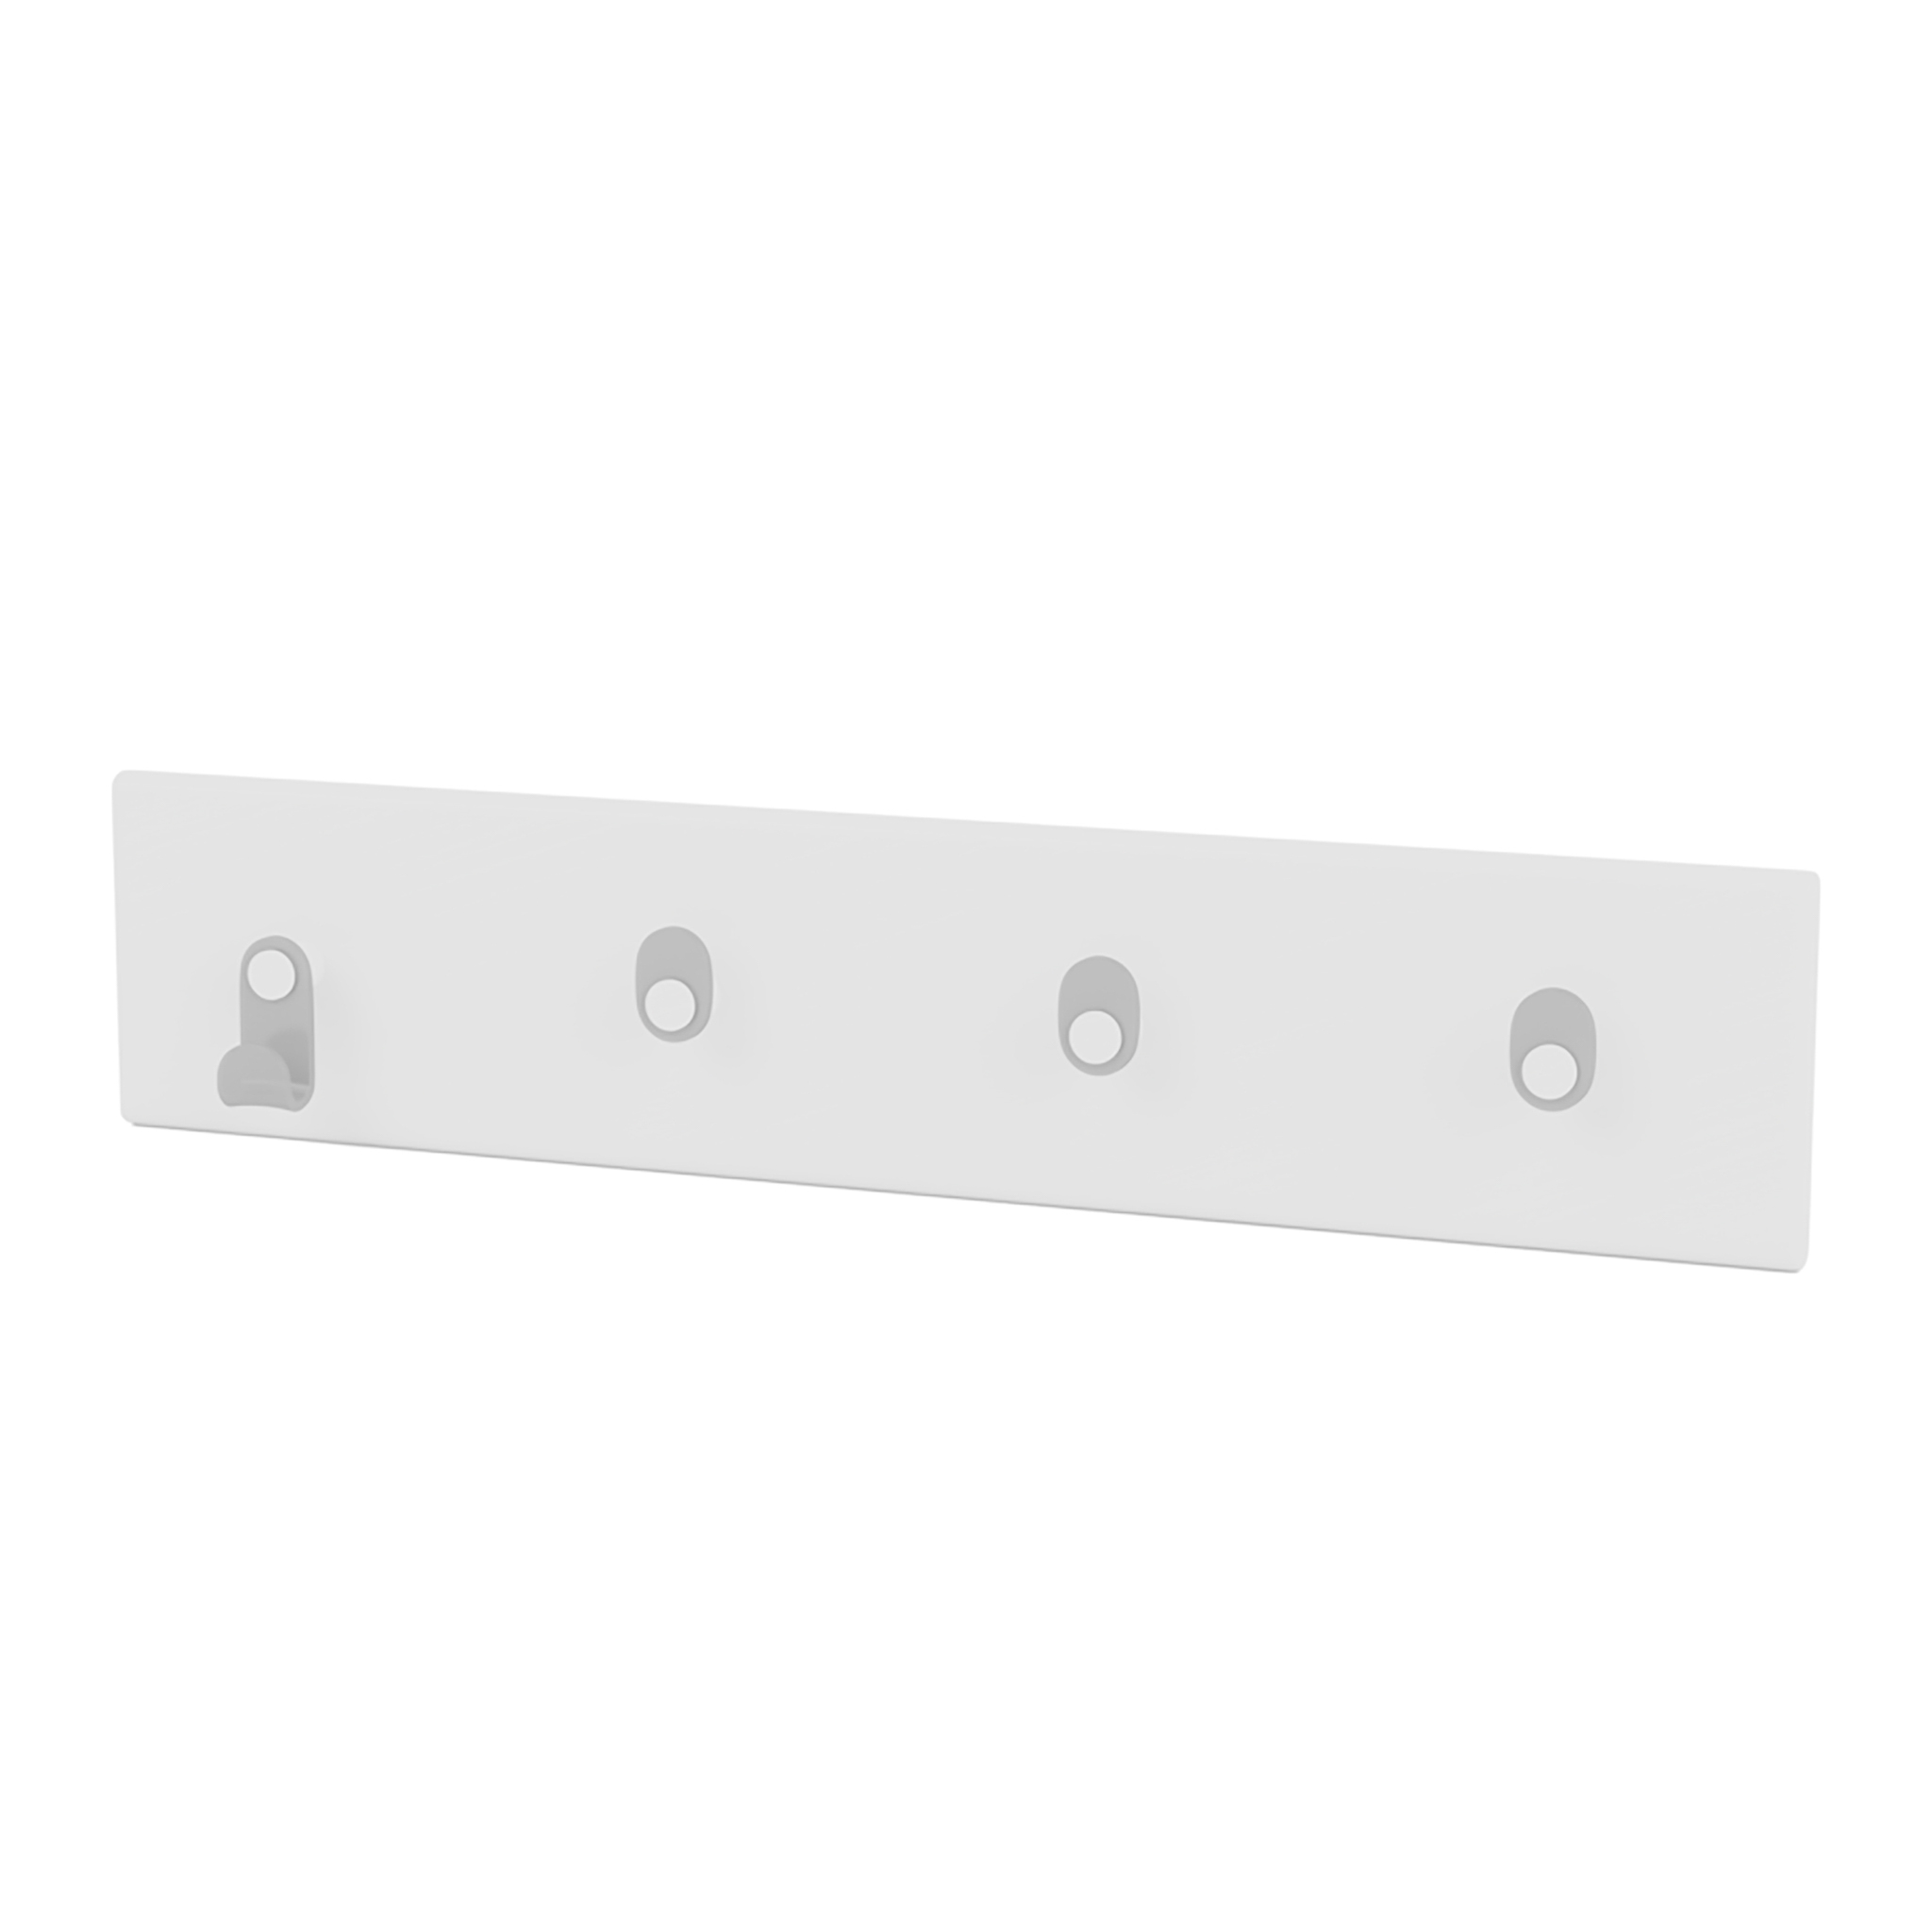 MONTANA // K812 - HOOK RAIL WITH FOUR BUTTONS | 101 NEW WHITE